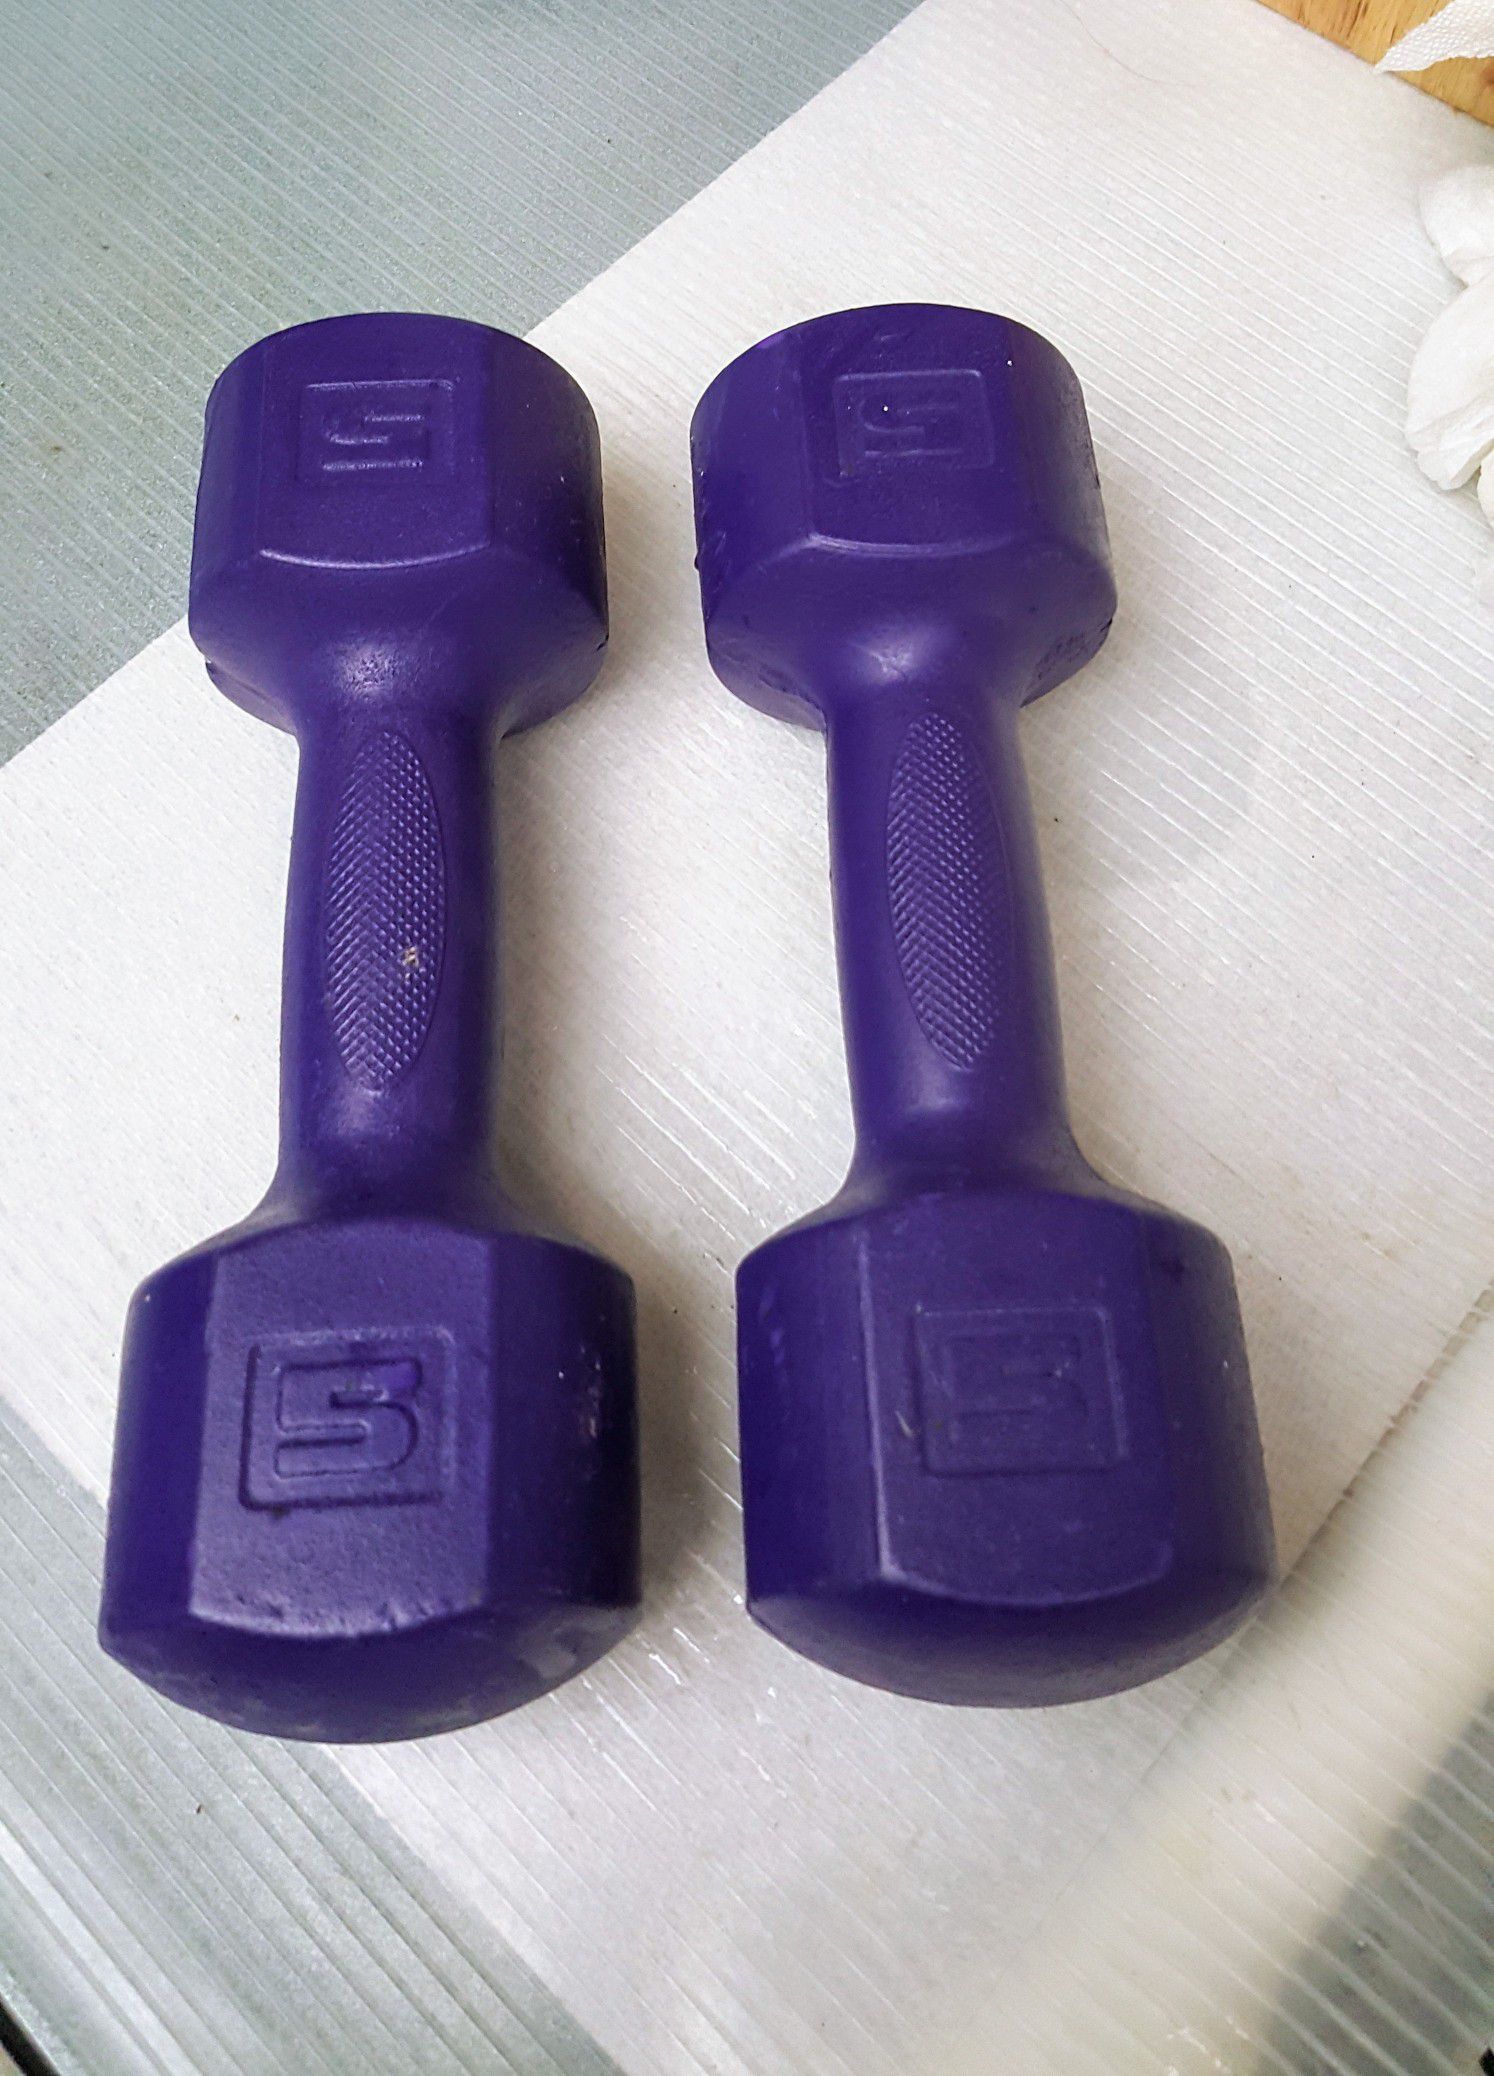 5 lbs set Dumbbell weight